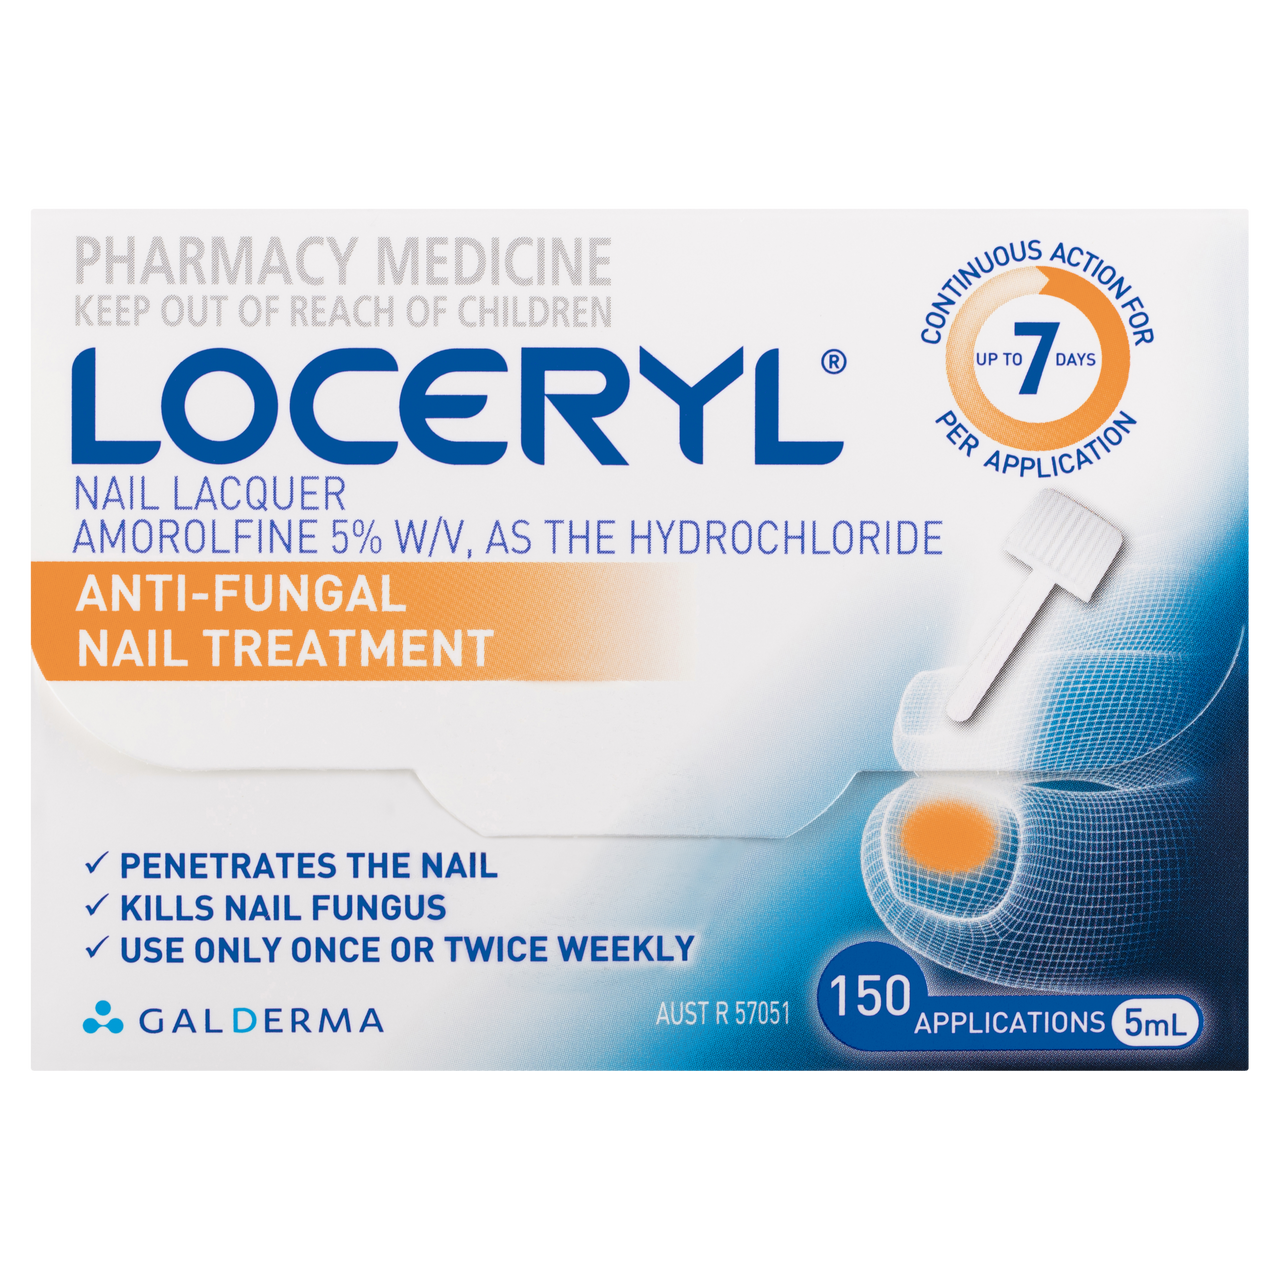 Loceryl Cream 10 gm Price, Uses, Side Effects, Composition - Apollo Pharmacy